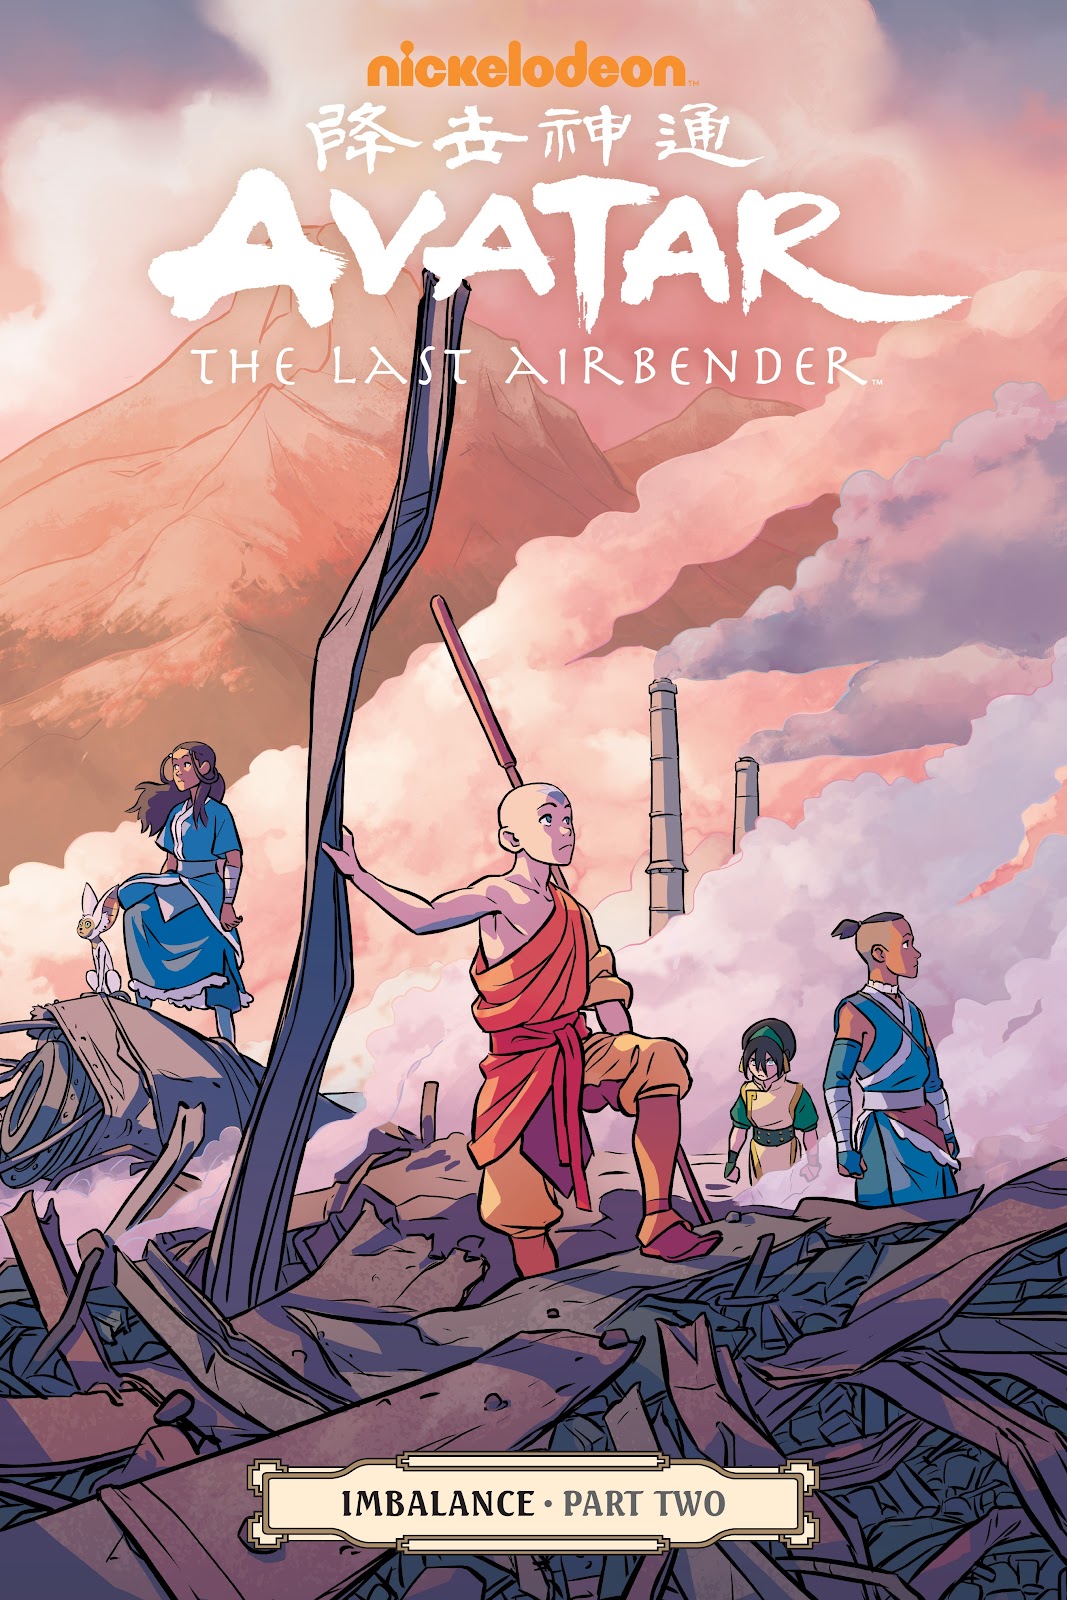 Read online Nickelodeon Avatar: The Last Airbender - Imbalance comic -  Issue # TPB 2 - 1